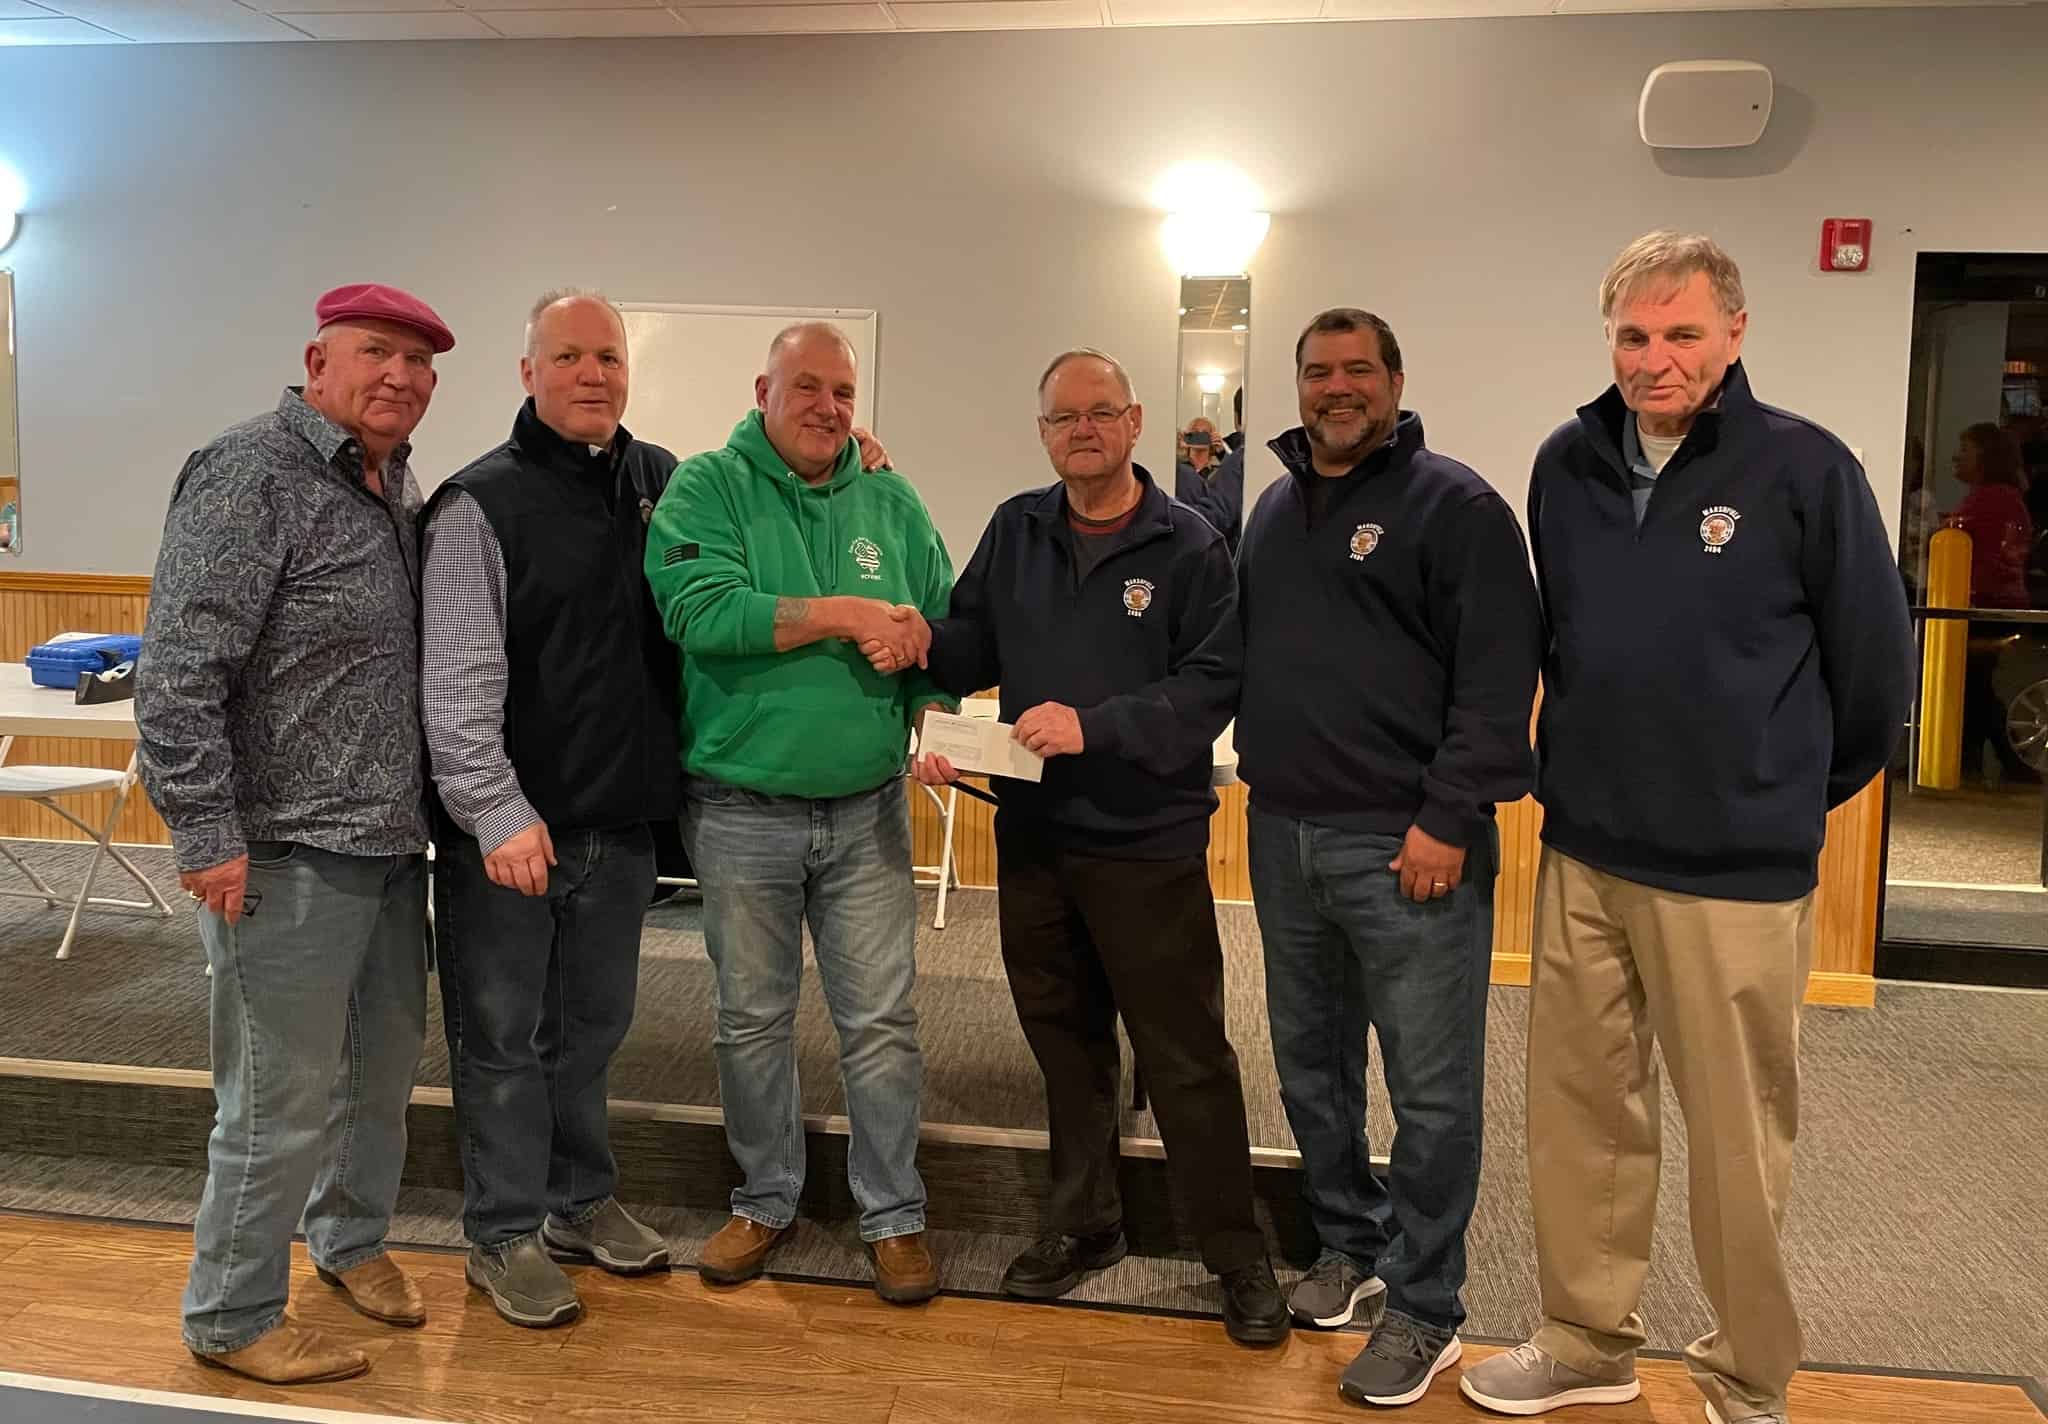 Thank you to the Marshfield Elks Lodge who donated $1,000 dollars to Cops For Kids With Cancer.